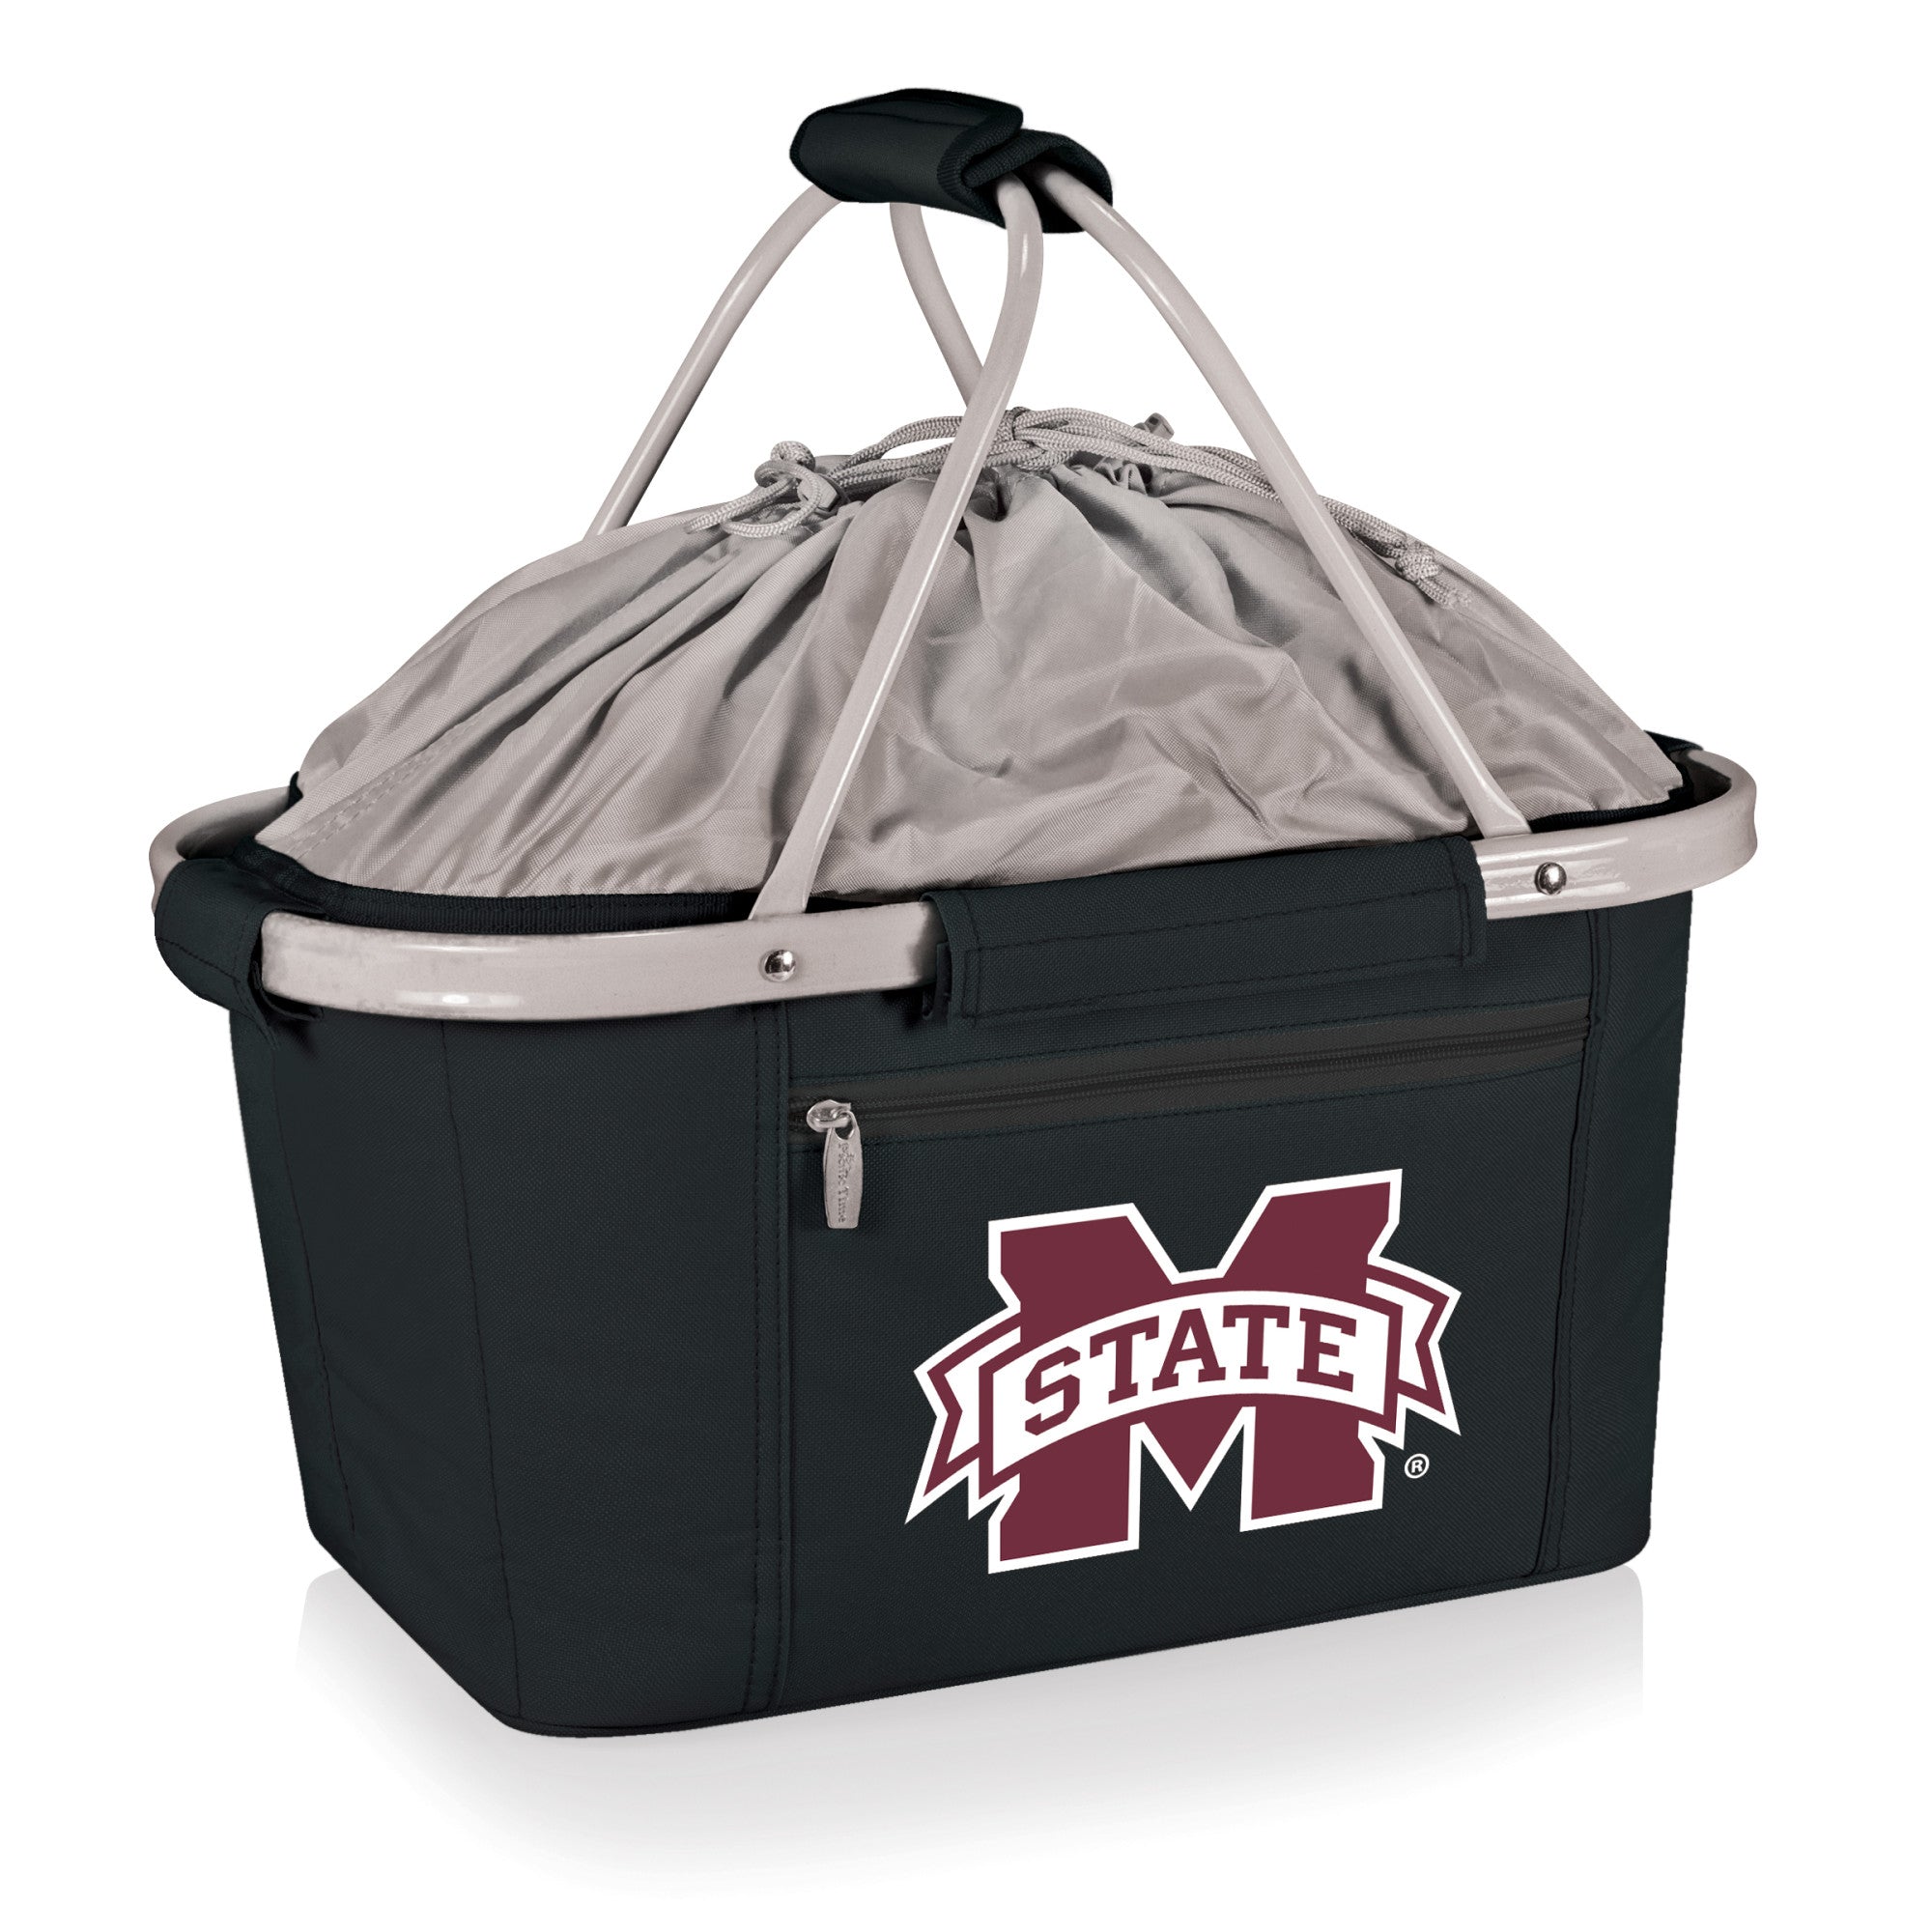 Mississippi State Bulldogs - Metro Basket Collapsible Cooler Tote